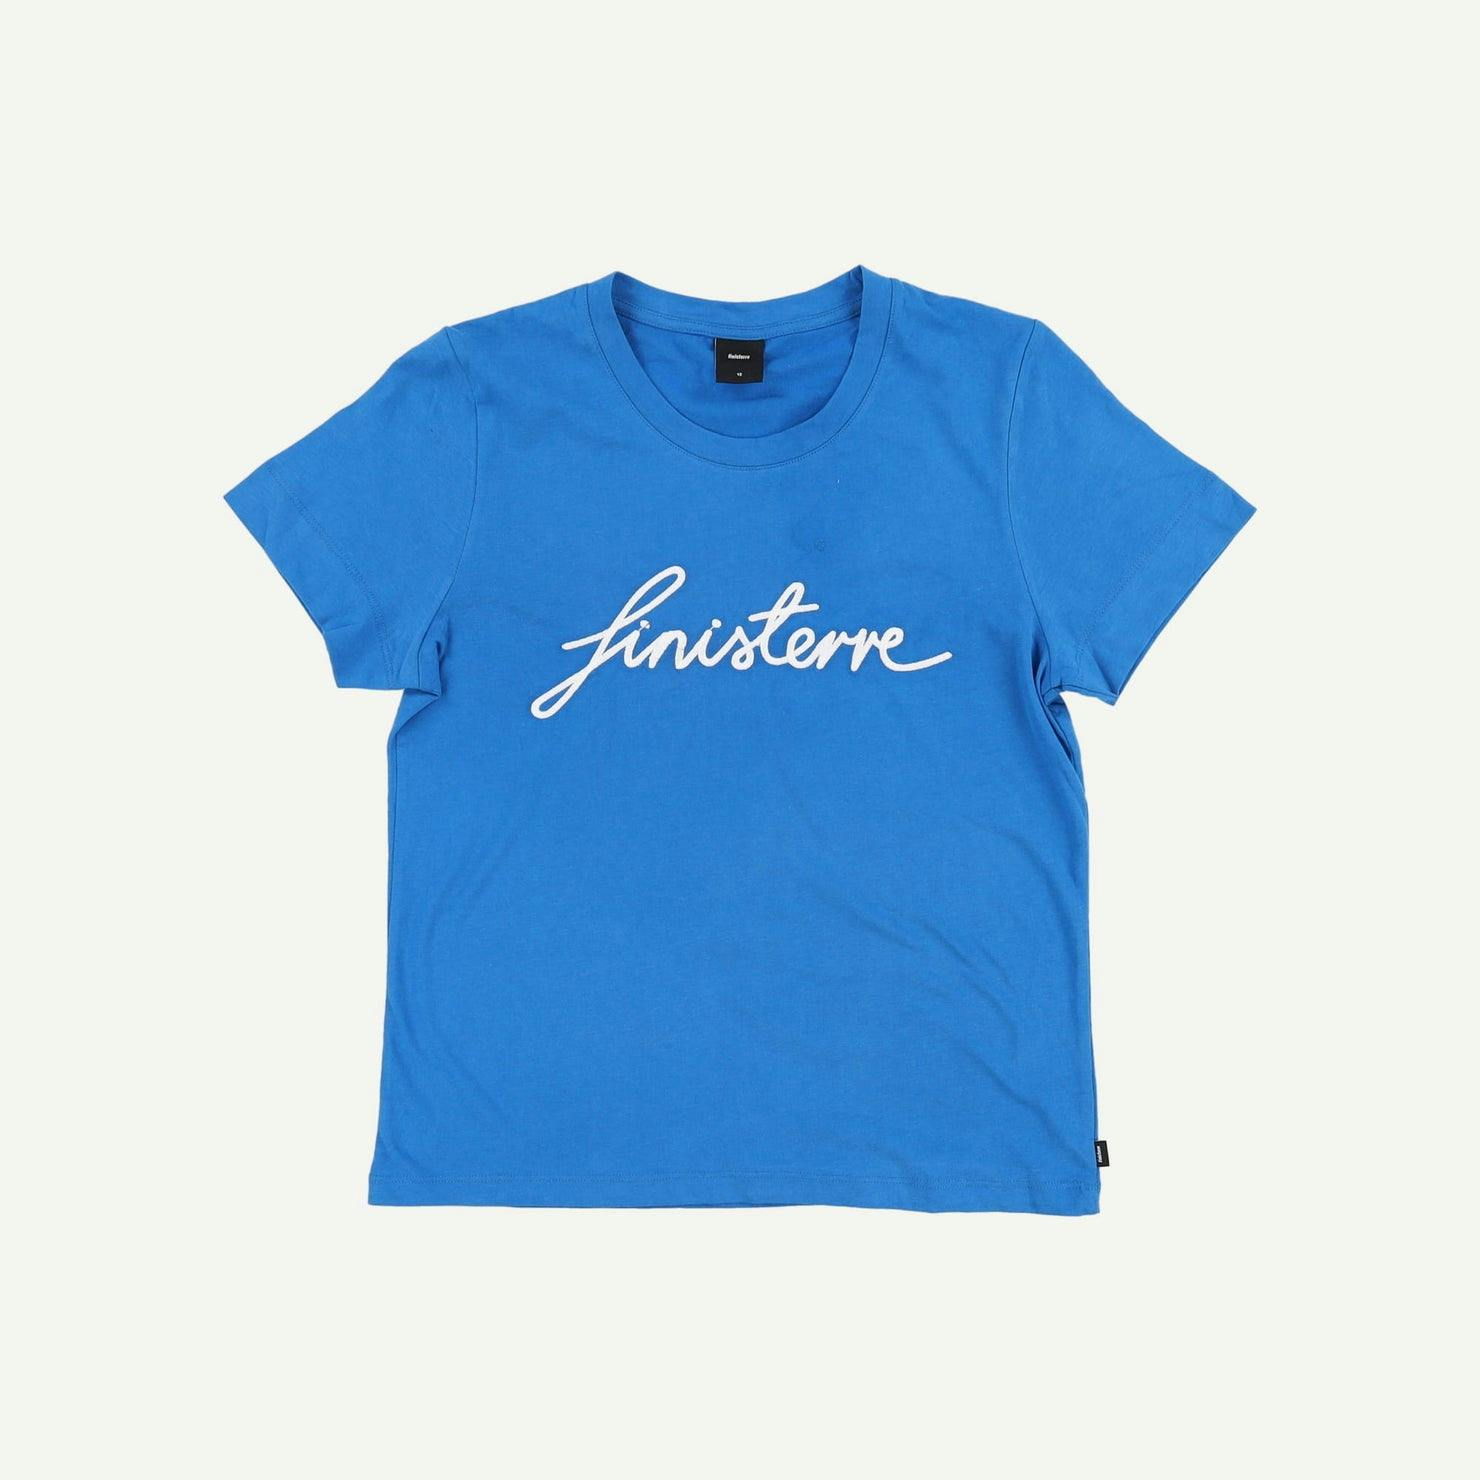 Finisterre Repaired Blue T-shirt